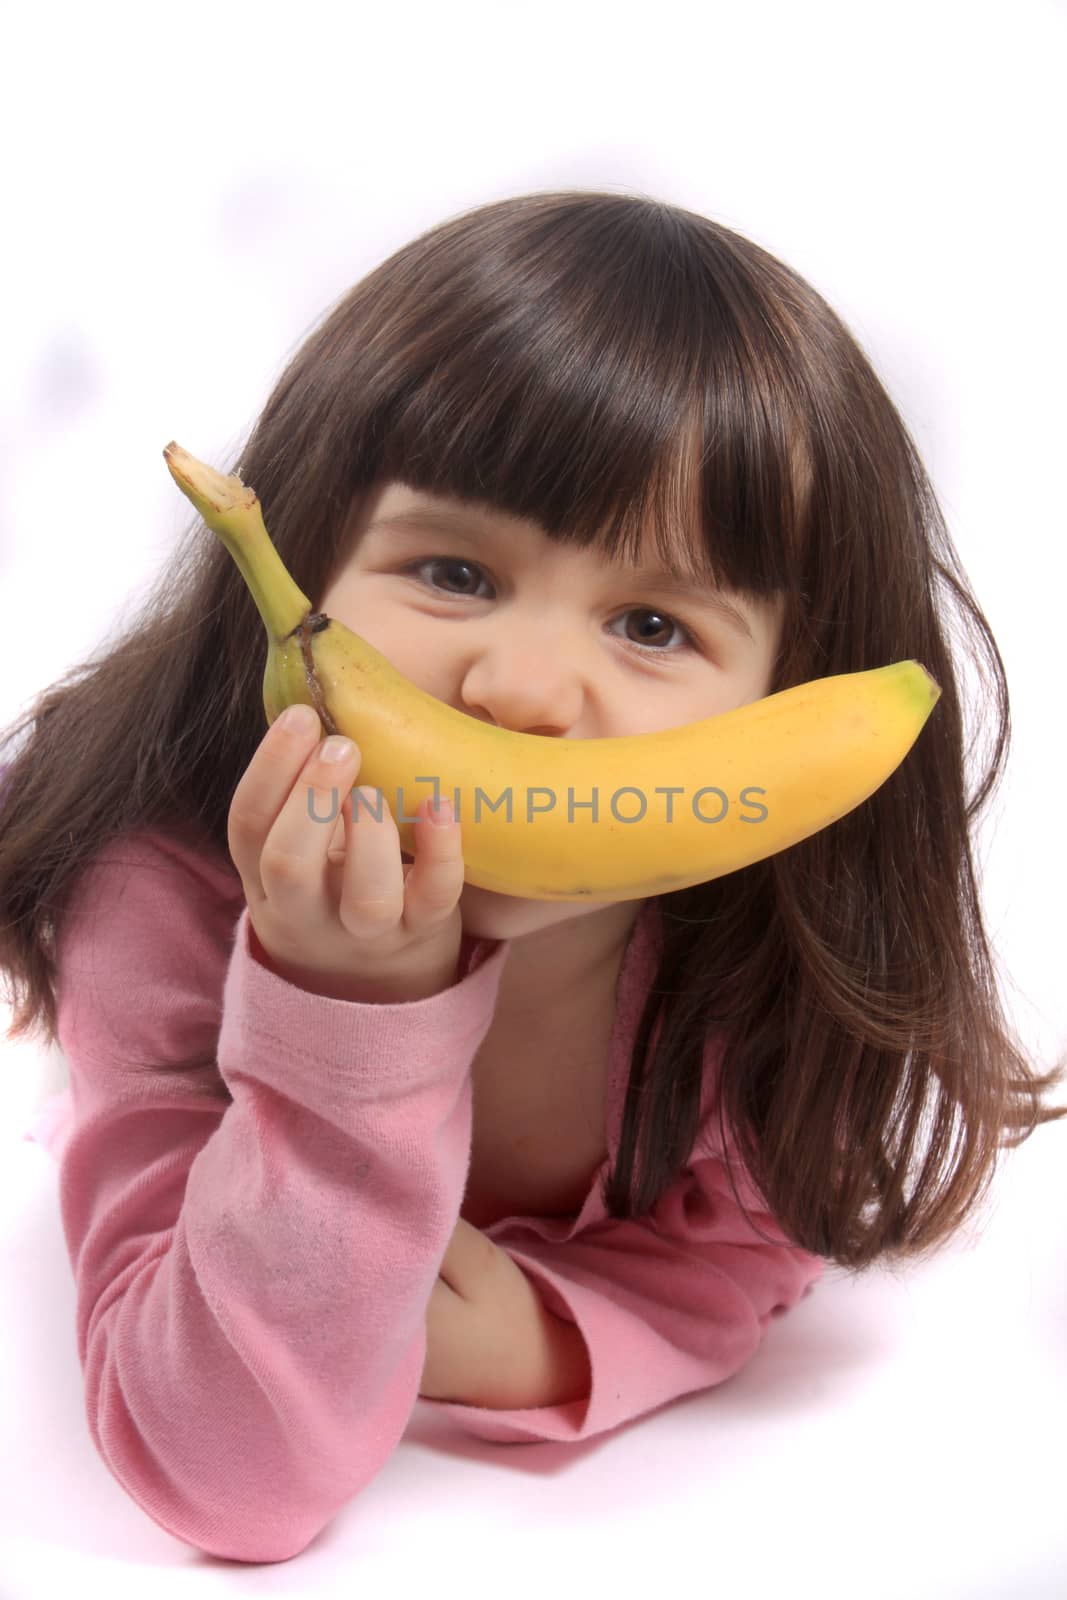 Young little girl making a funny face with a banana as her smile